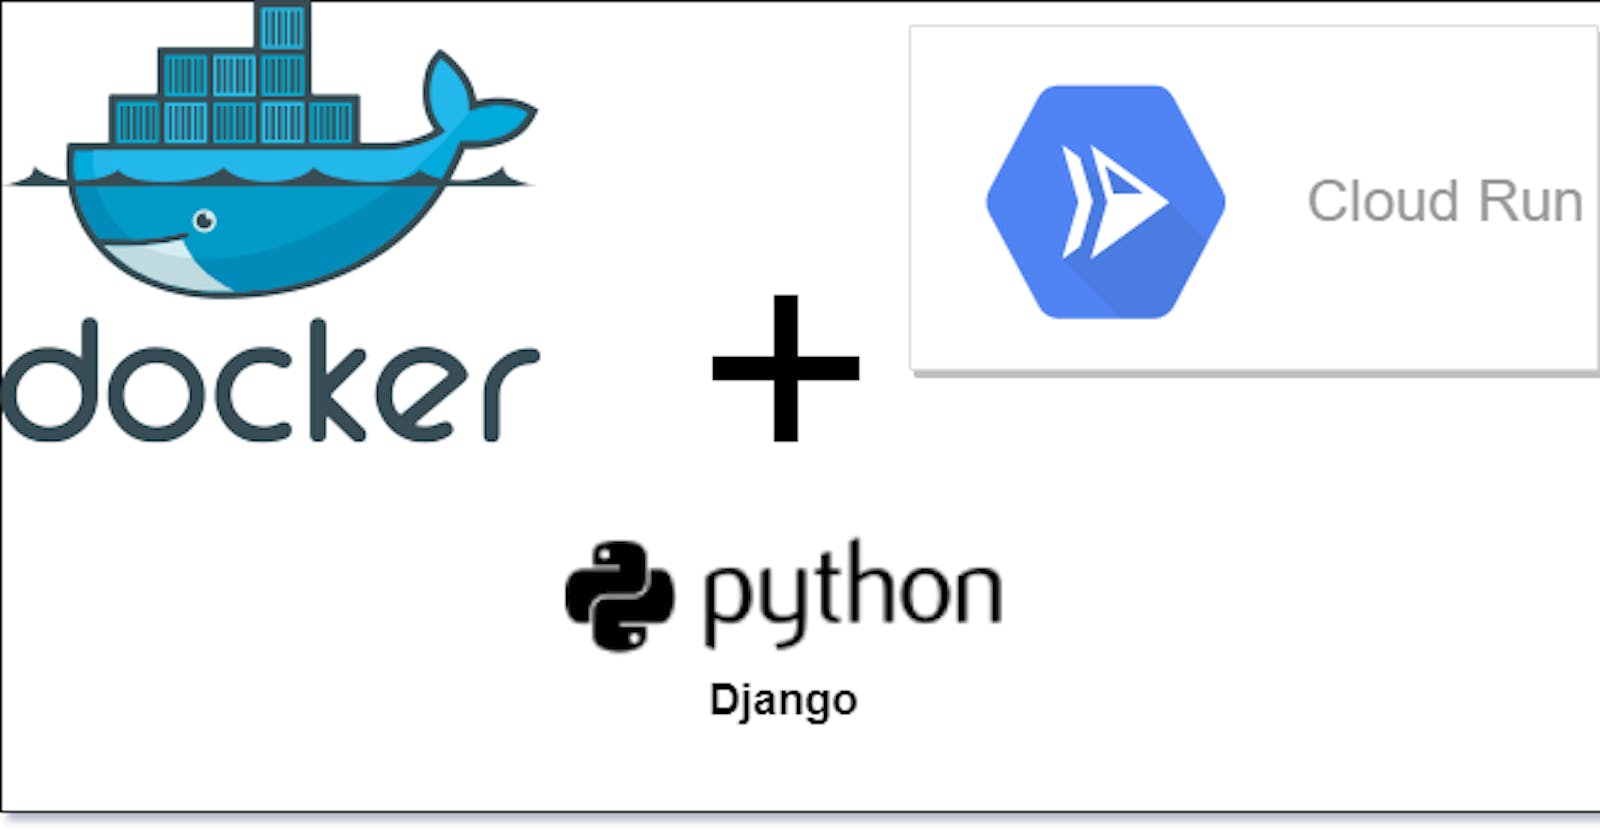 Create and Deploy Docker Container with Django and Gunicorn on Google Cloud Run